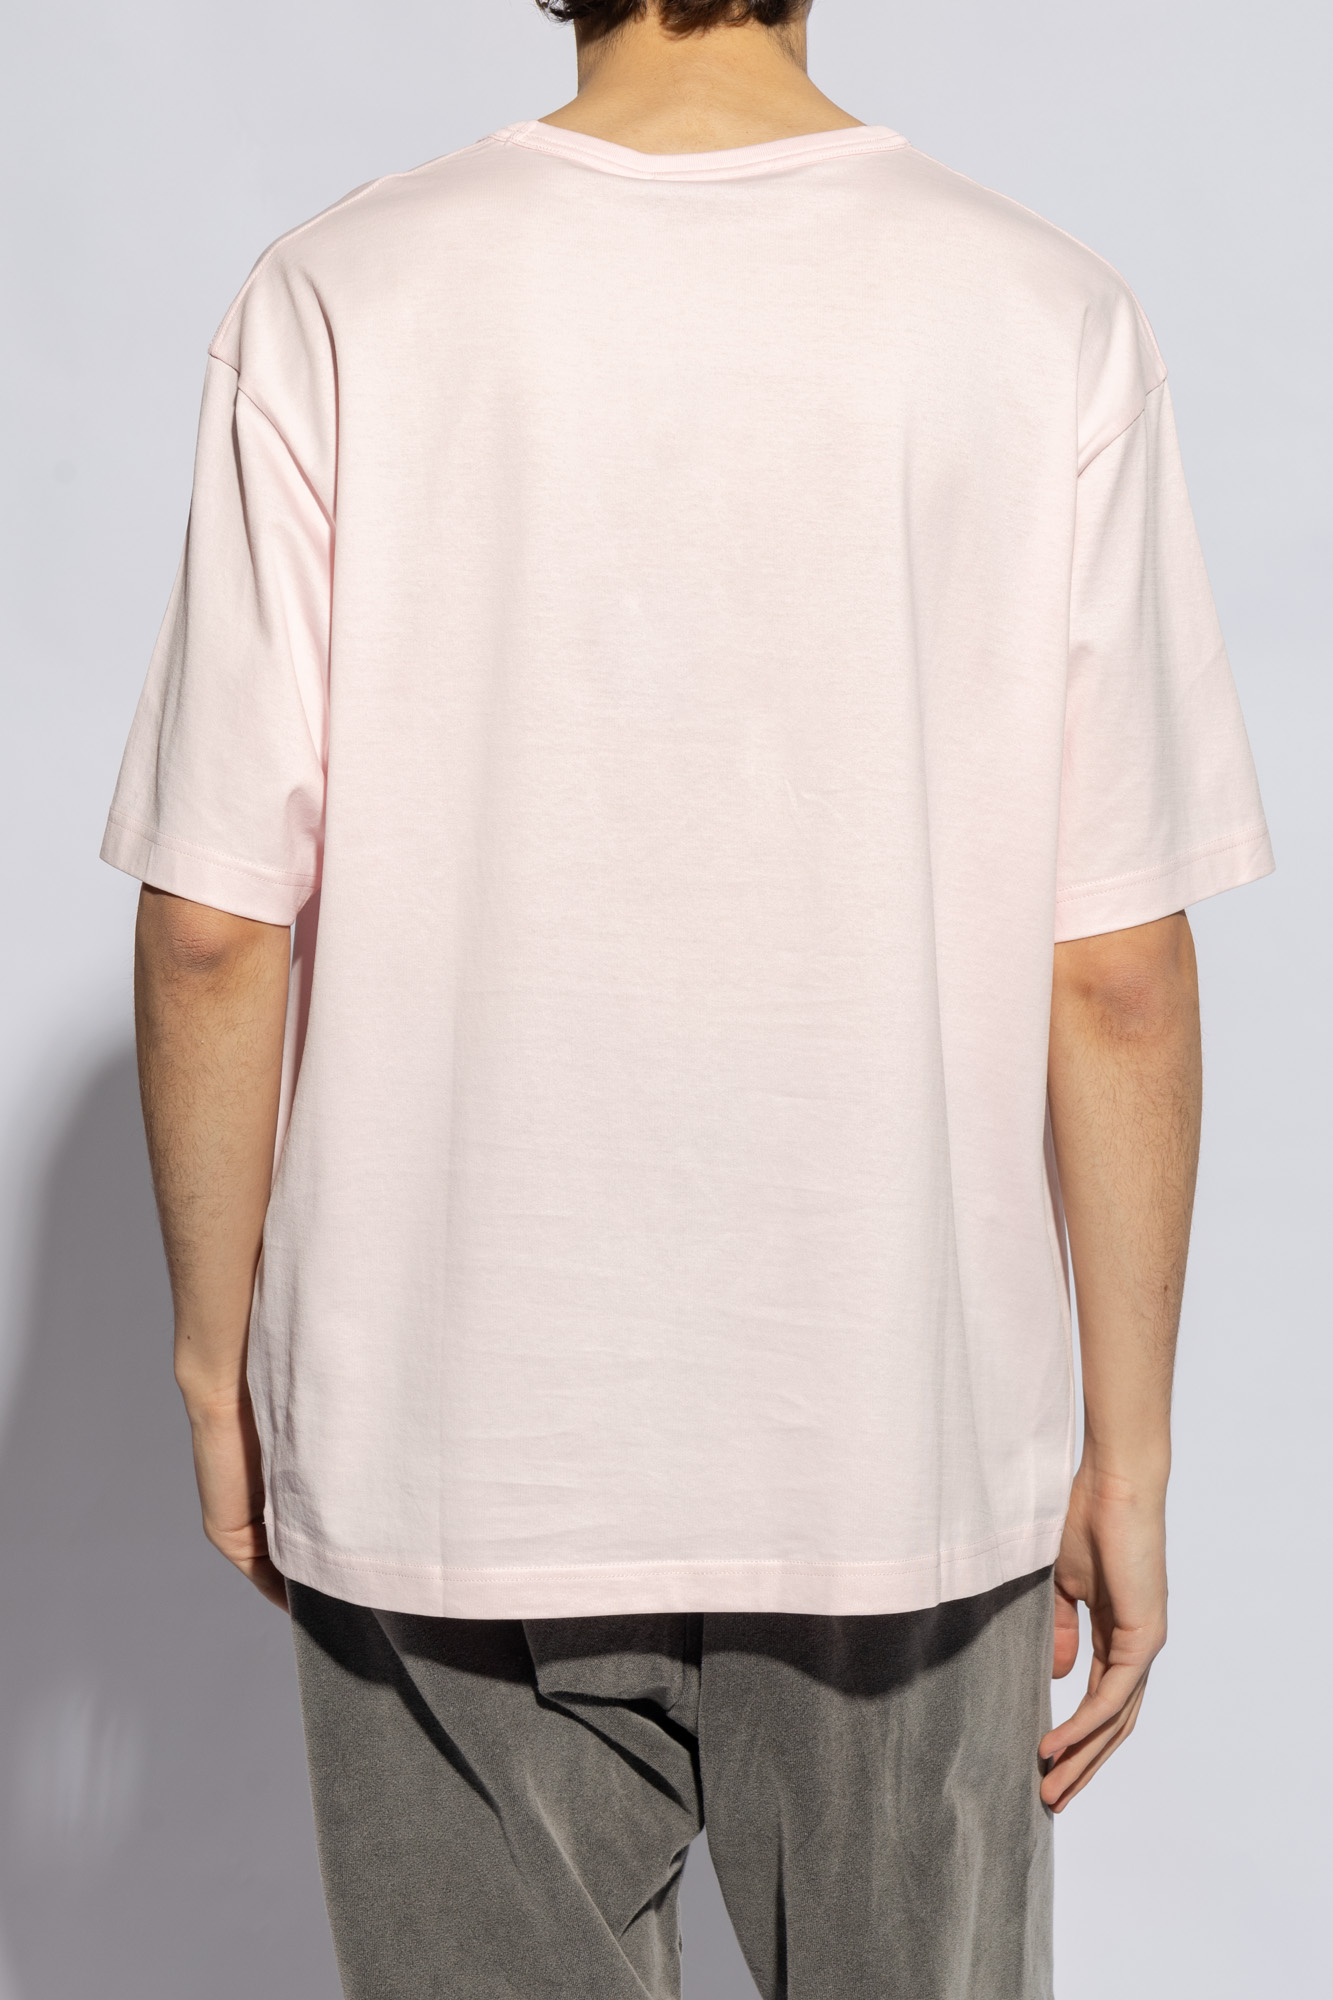 Acne Studios Patched T-shirt